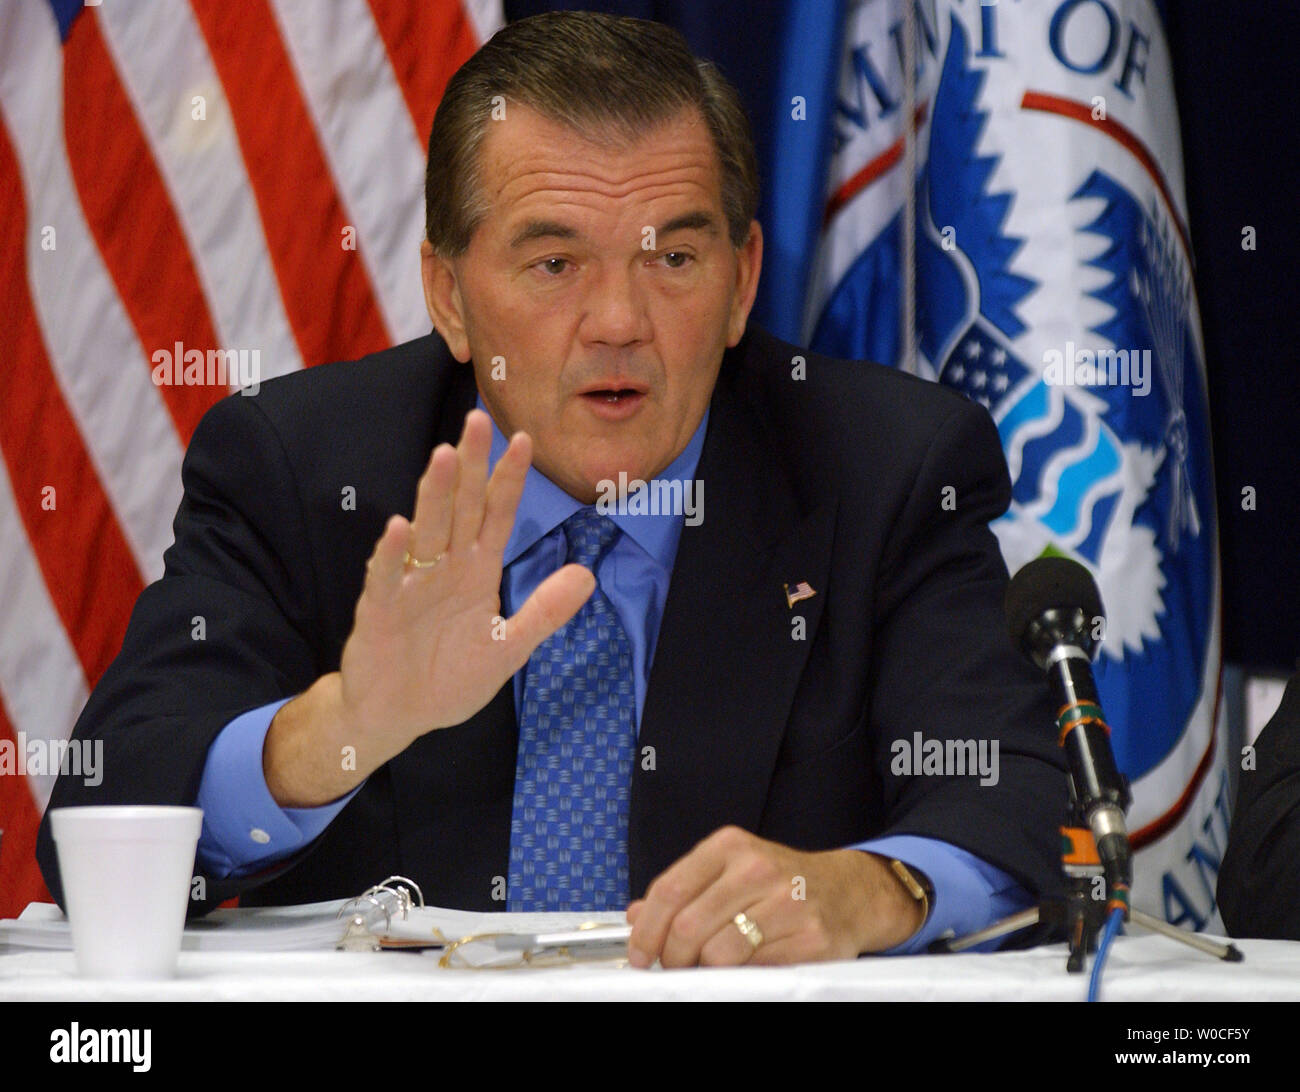 Secretary of Homeland Security Tom Ridge speaks during a meeting of the Homeland Security Advisory Committee (HSAC) at the Coast Guard Headquarters in Washington on Sept. 22, 2004. HSAC, a group of public and private officials, meets regulary to discuss security issues and make recommendations.   (UPI Photo/Roger L. Wollenberg) Stock Photo